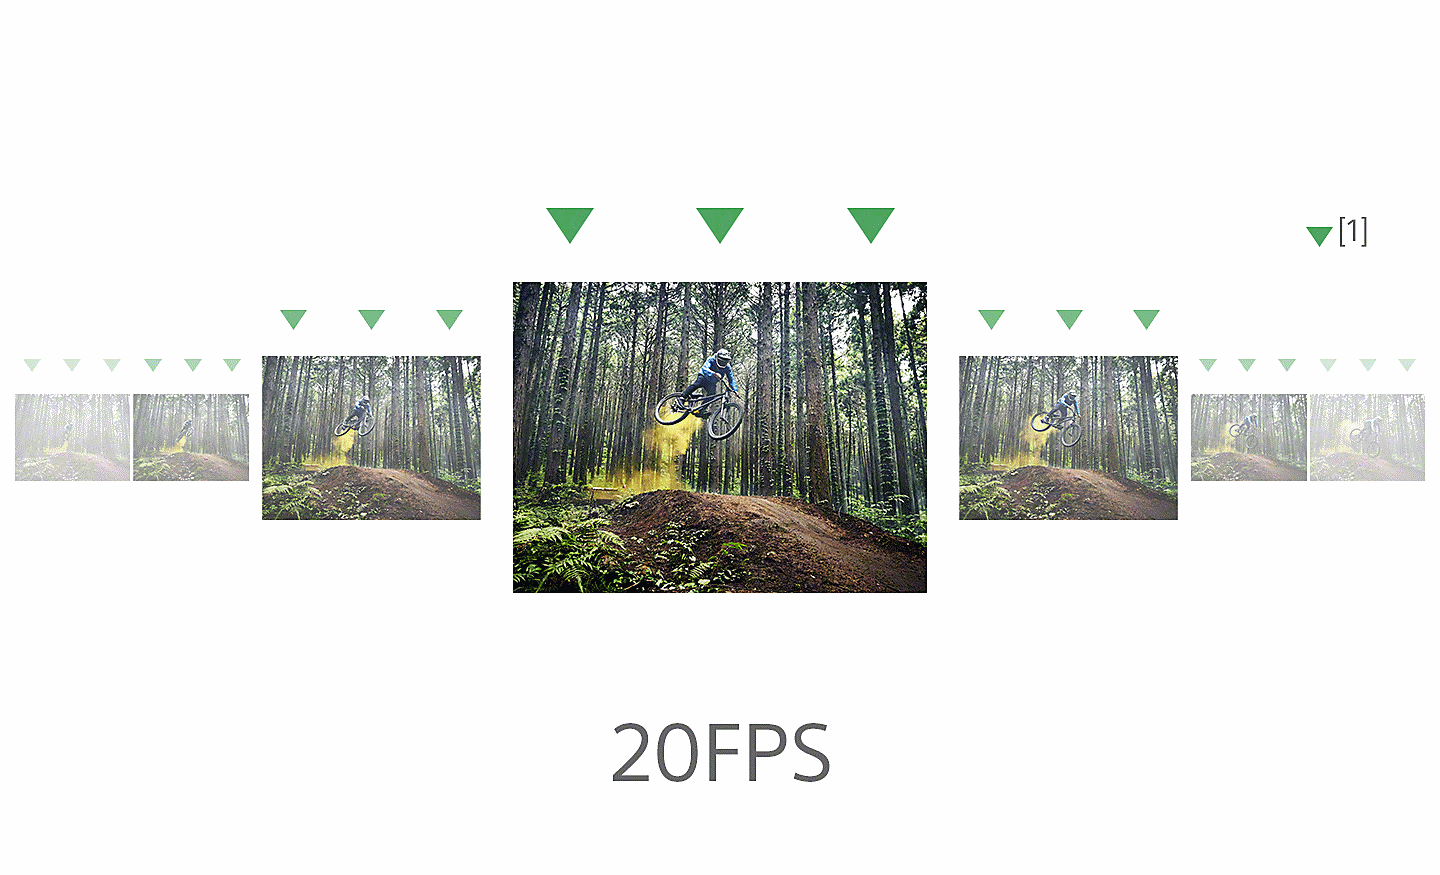 Multiple frames showing a mountain biker jumping on a forest track